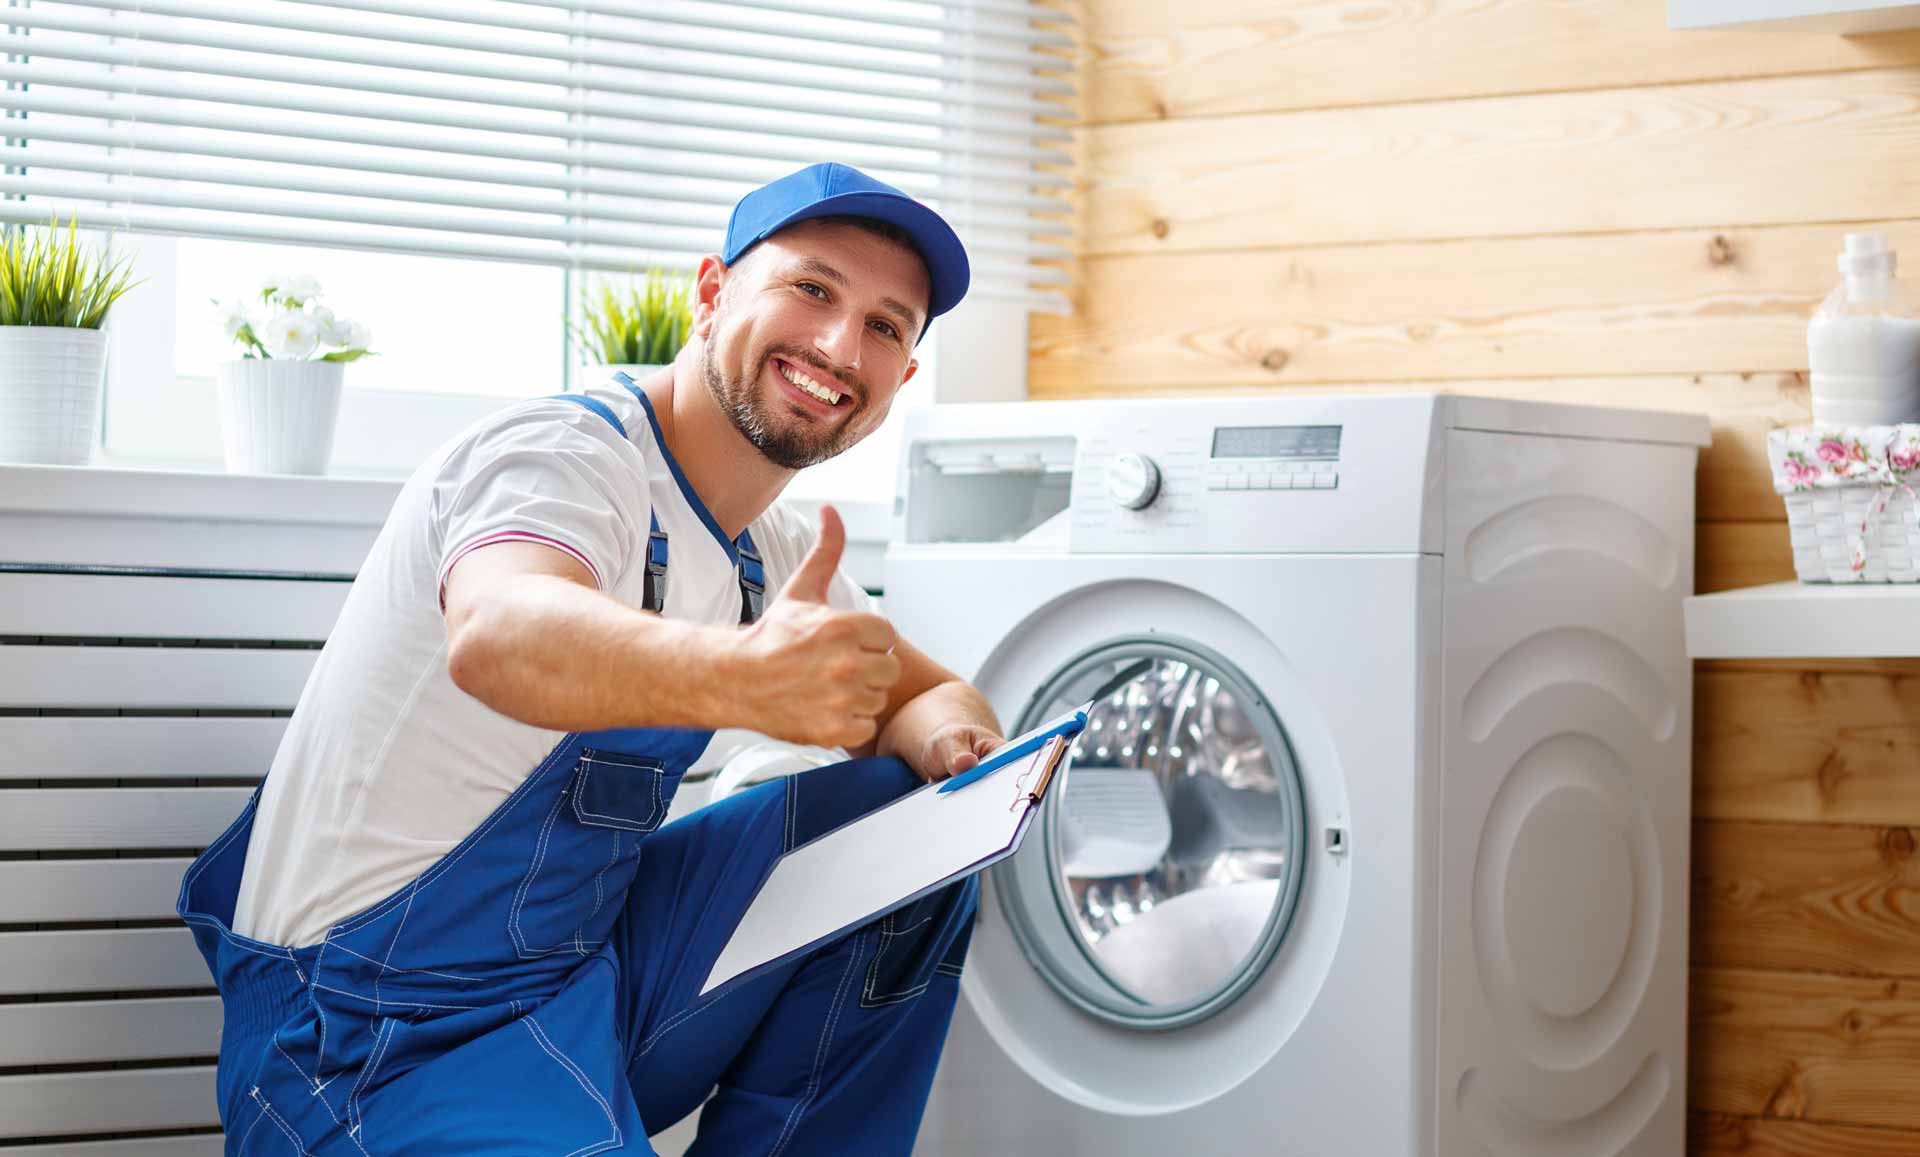 Appliance repair technician kneeling in front of a washer/dryer. He is smiling at the camera and giving a thumbs up gesture